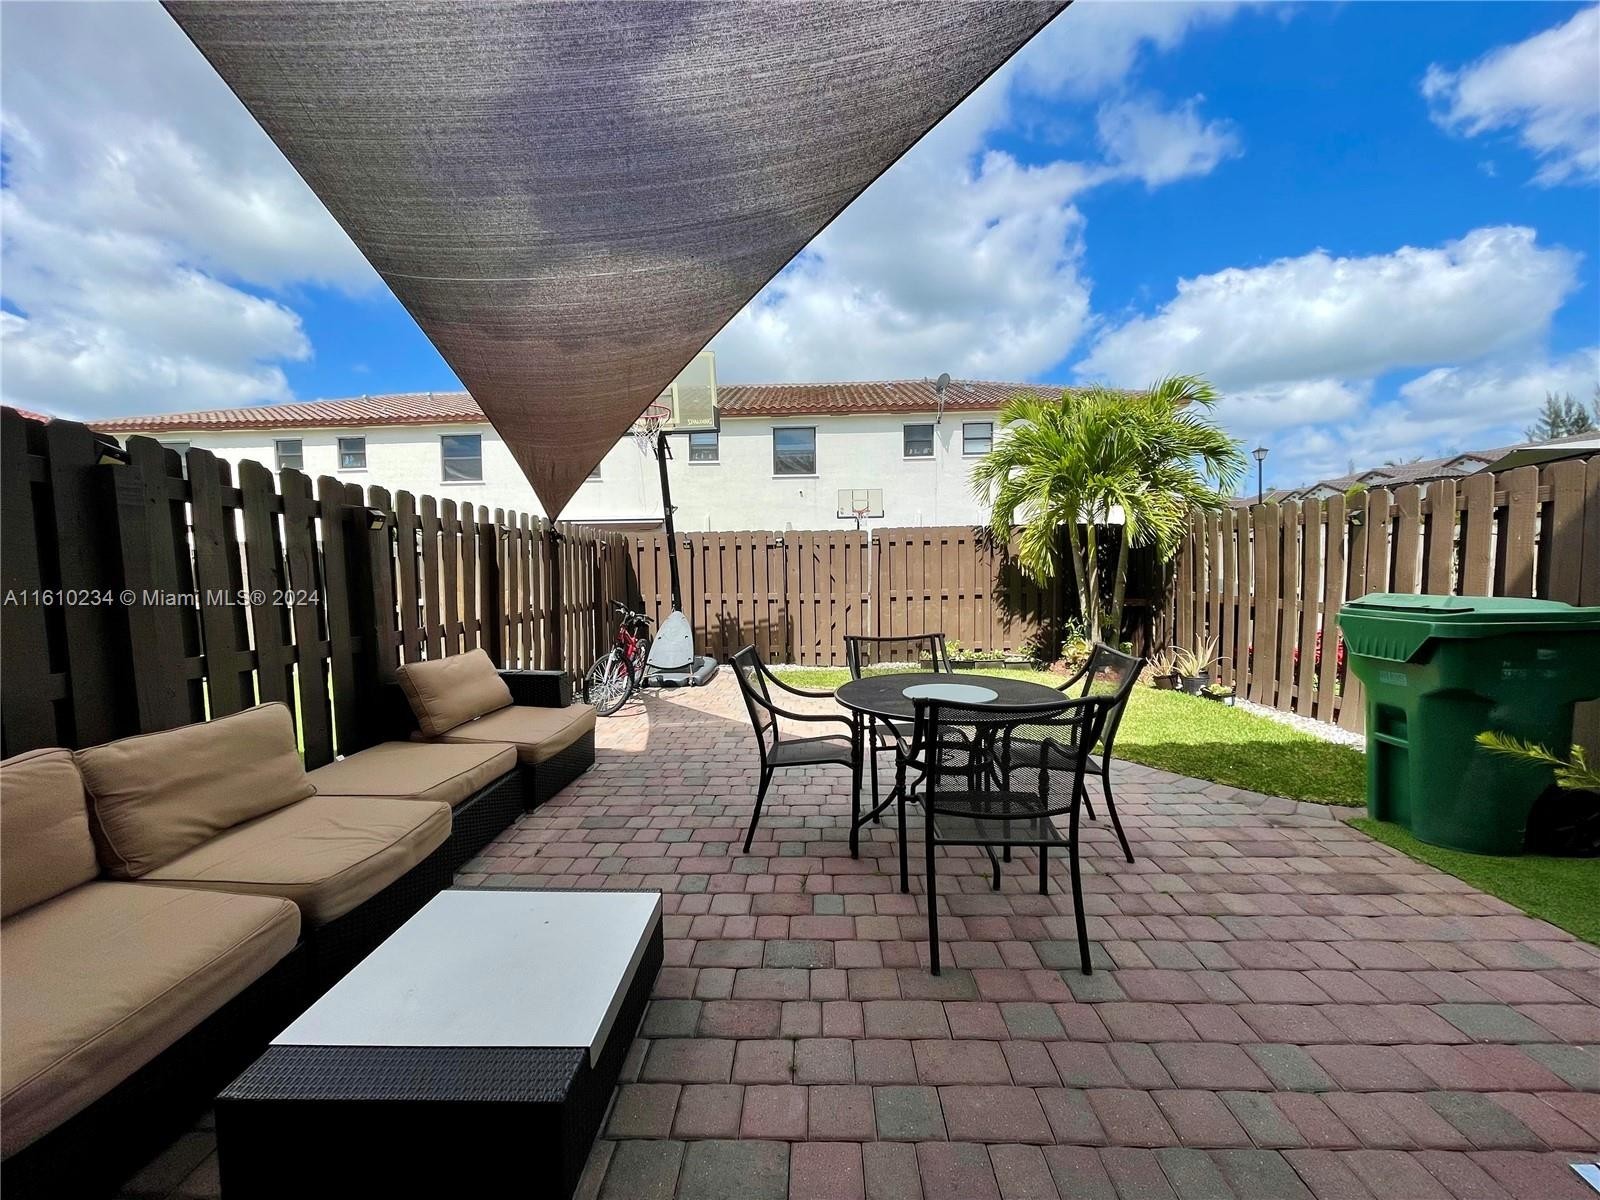 31. 8886 NW 102nd Pl